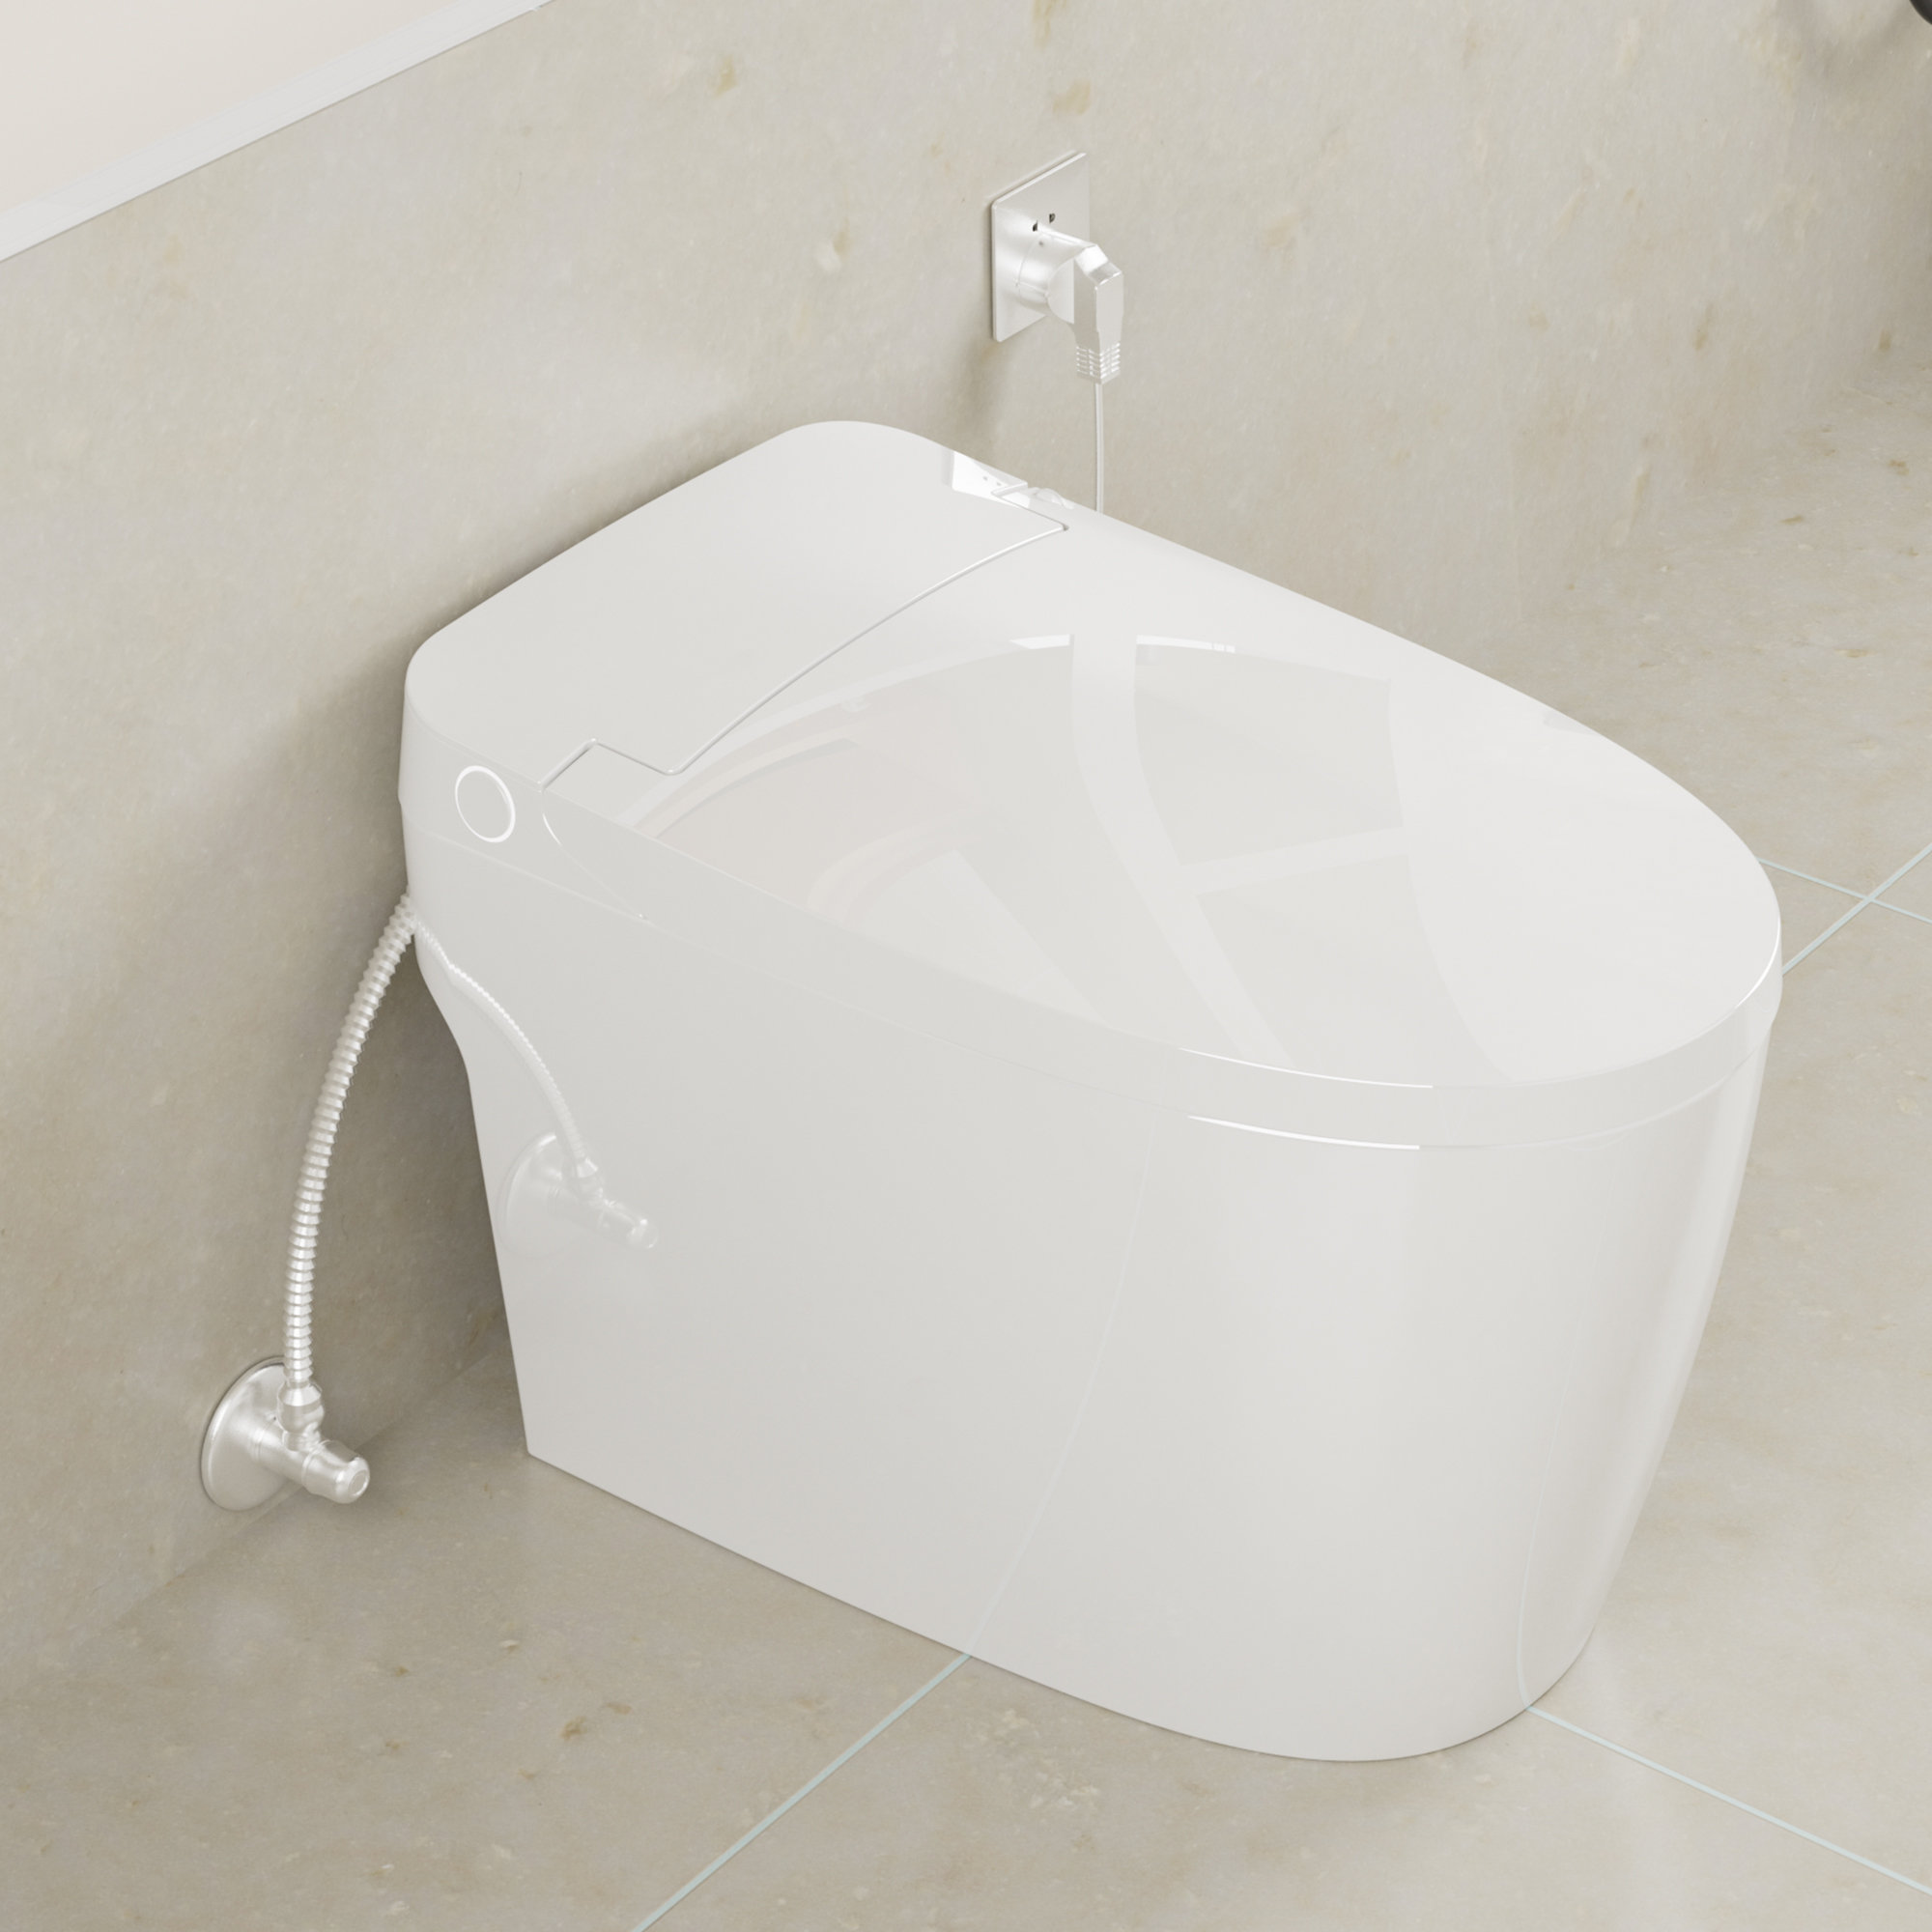 SUPERFLO Smart Tankless Toilet with Auto Flush, One-Piece Smart Toilet with  Heated Seat & Night Light for Bathrooms